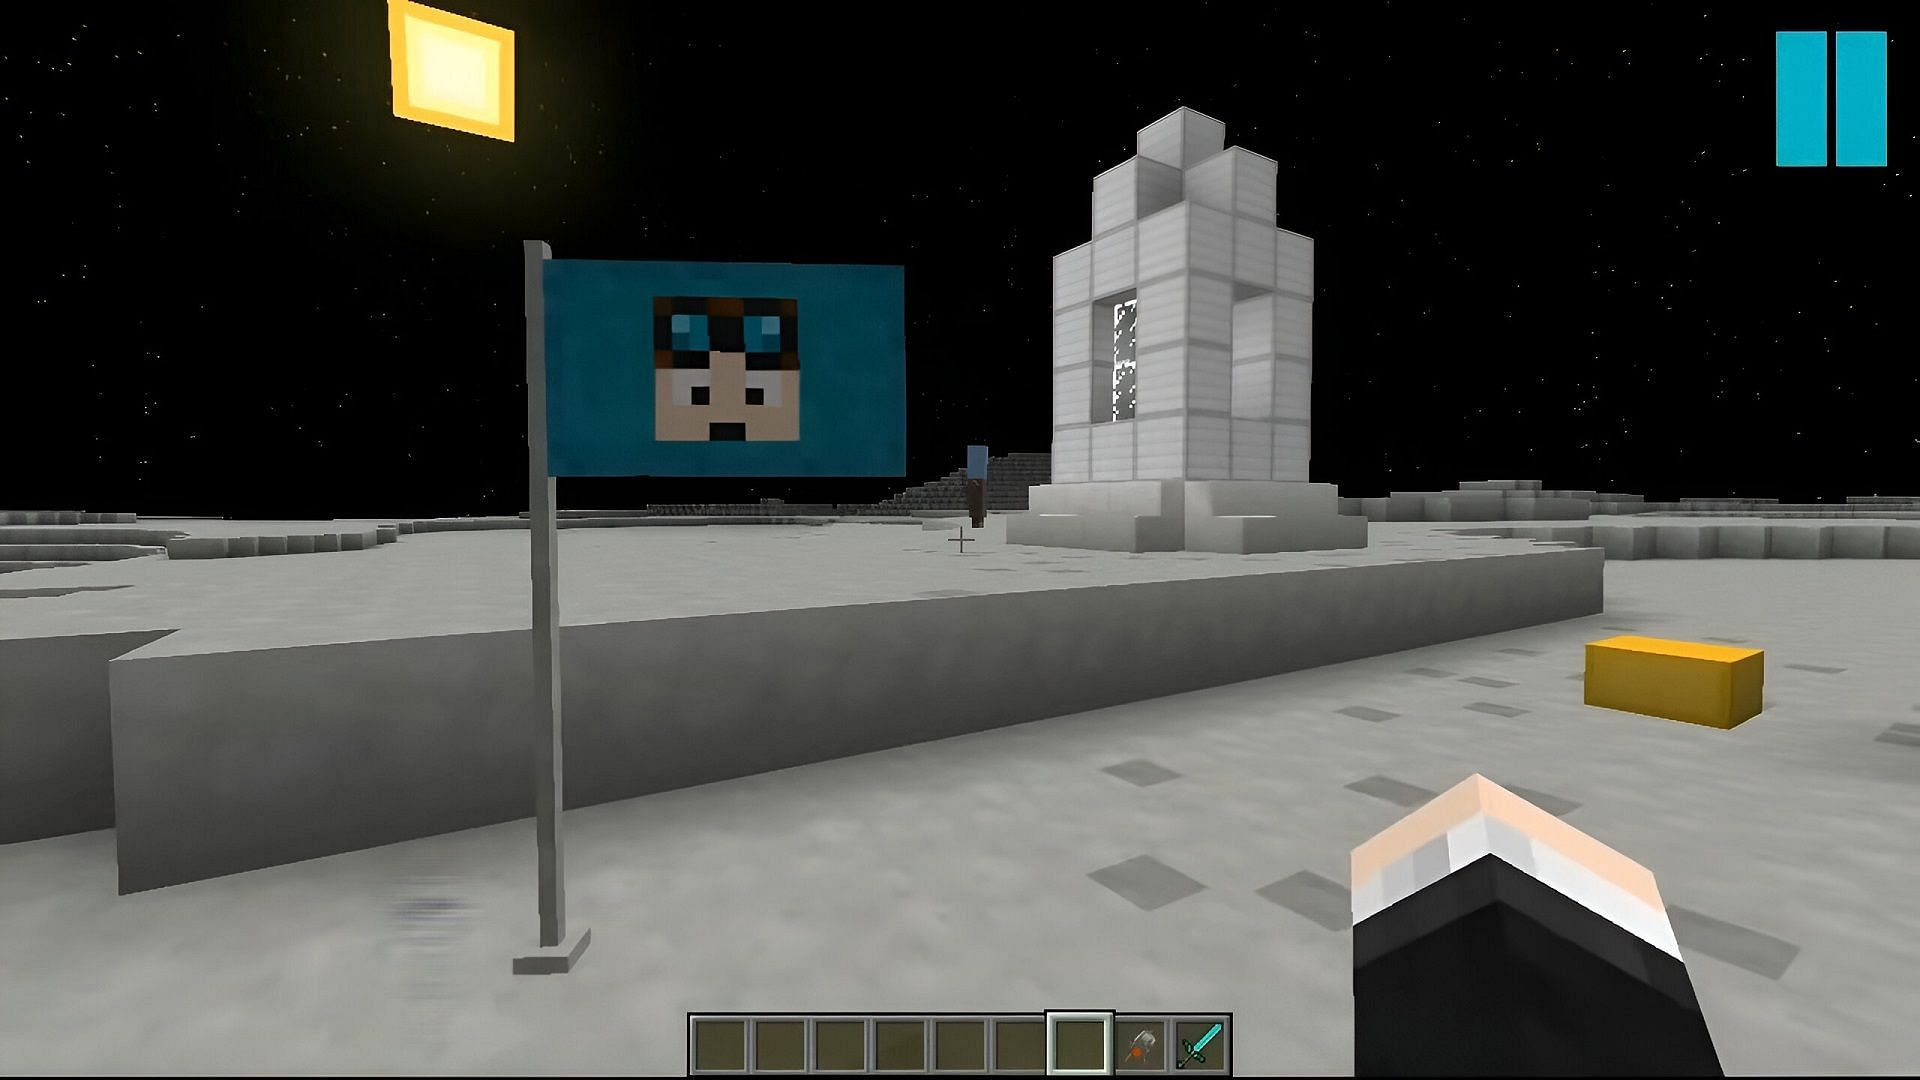 Galacticraft is another fantastic space mod in Minecraft (Image via DanTDM/YouTube)